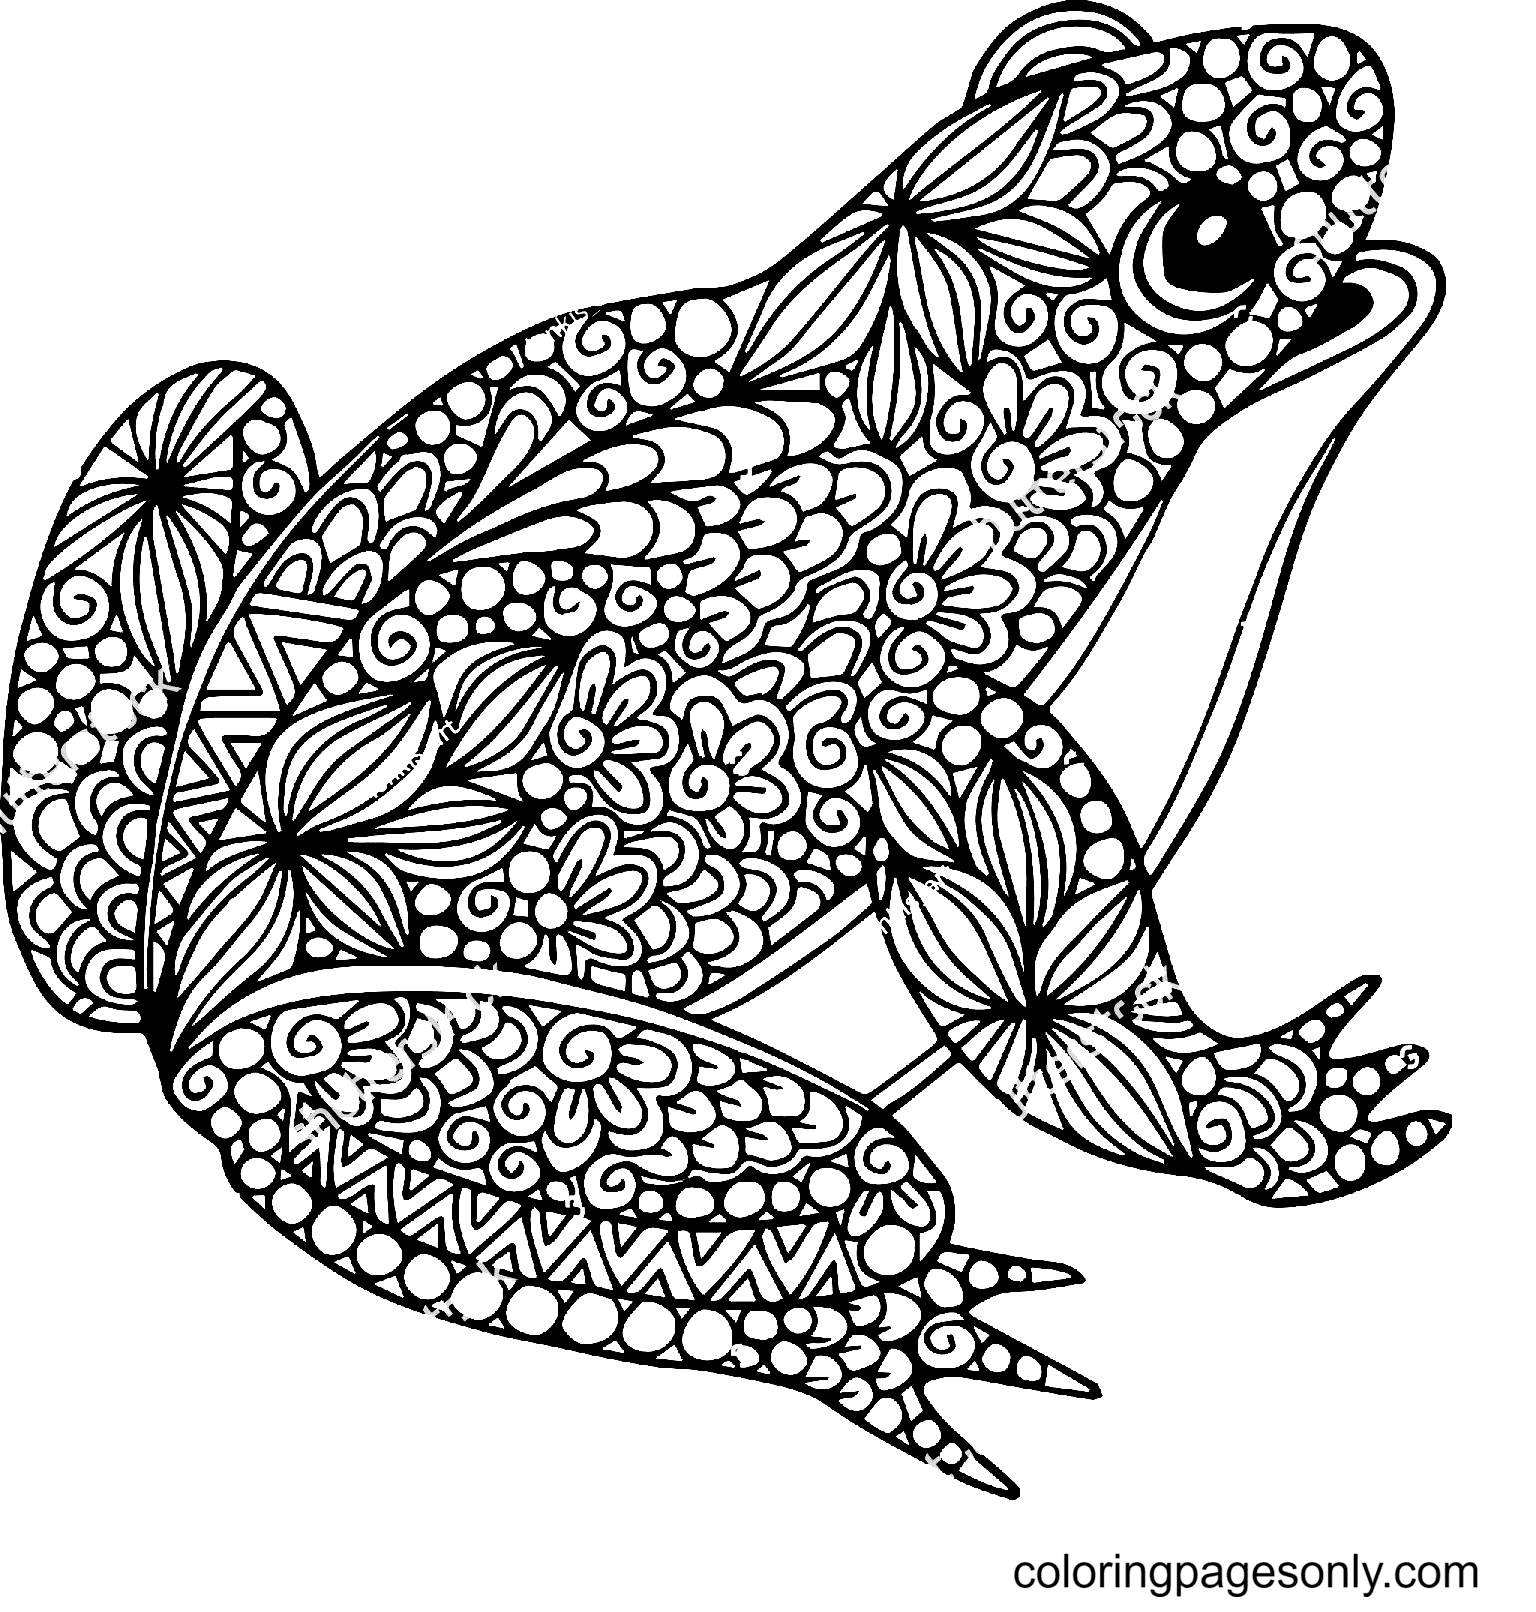 Frog coloring pages printable for free download